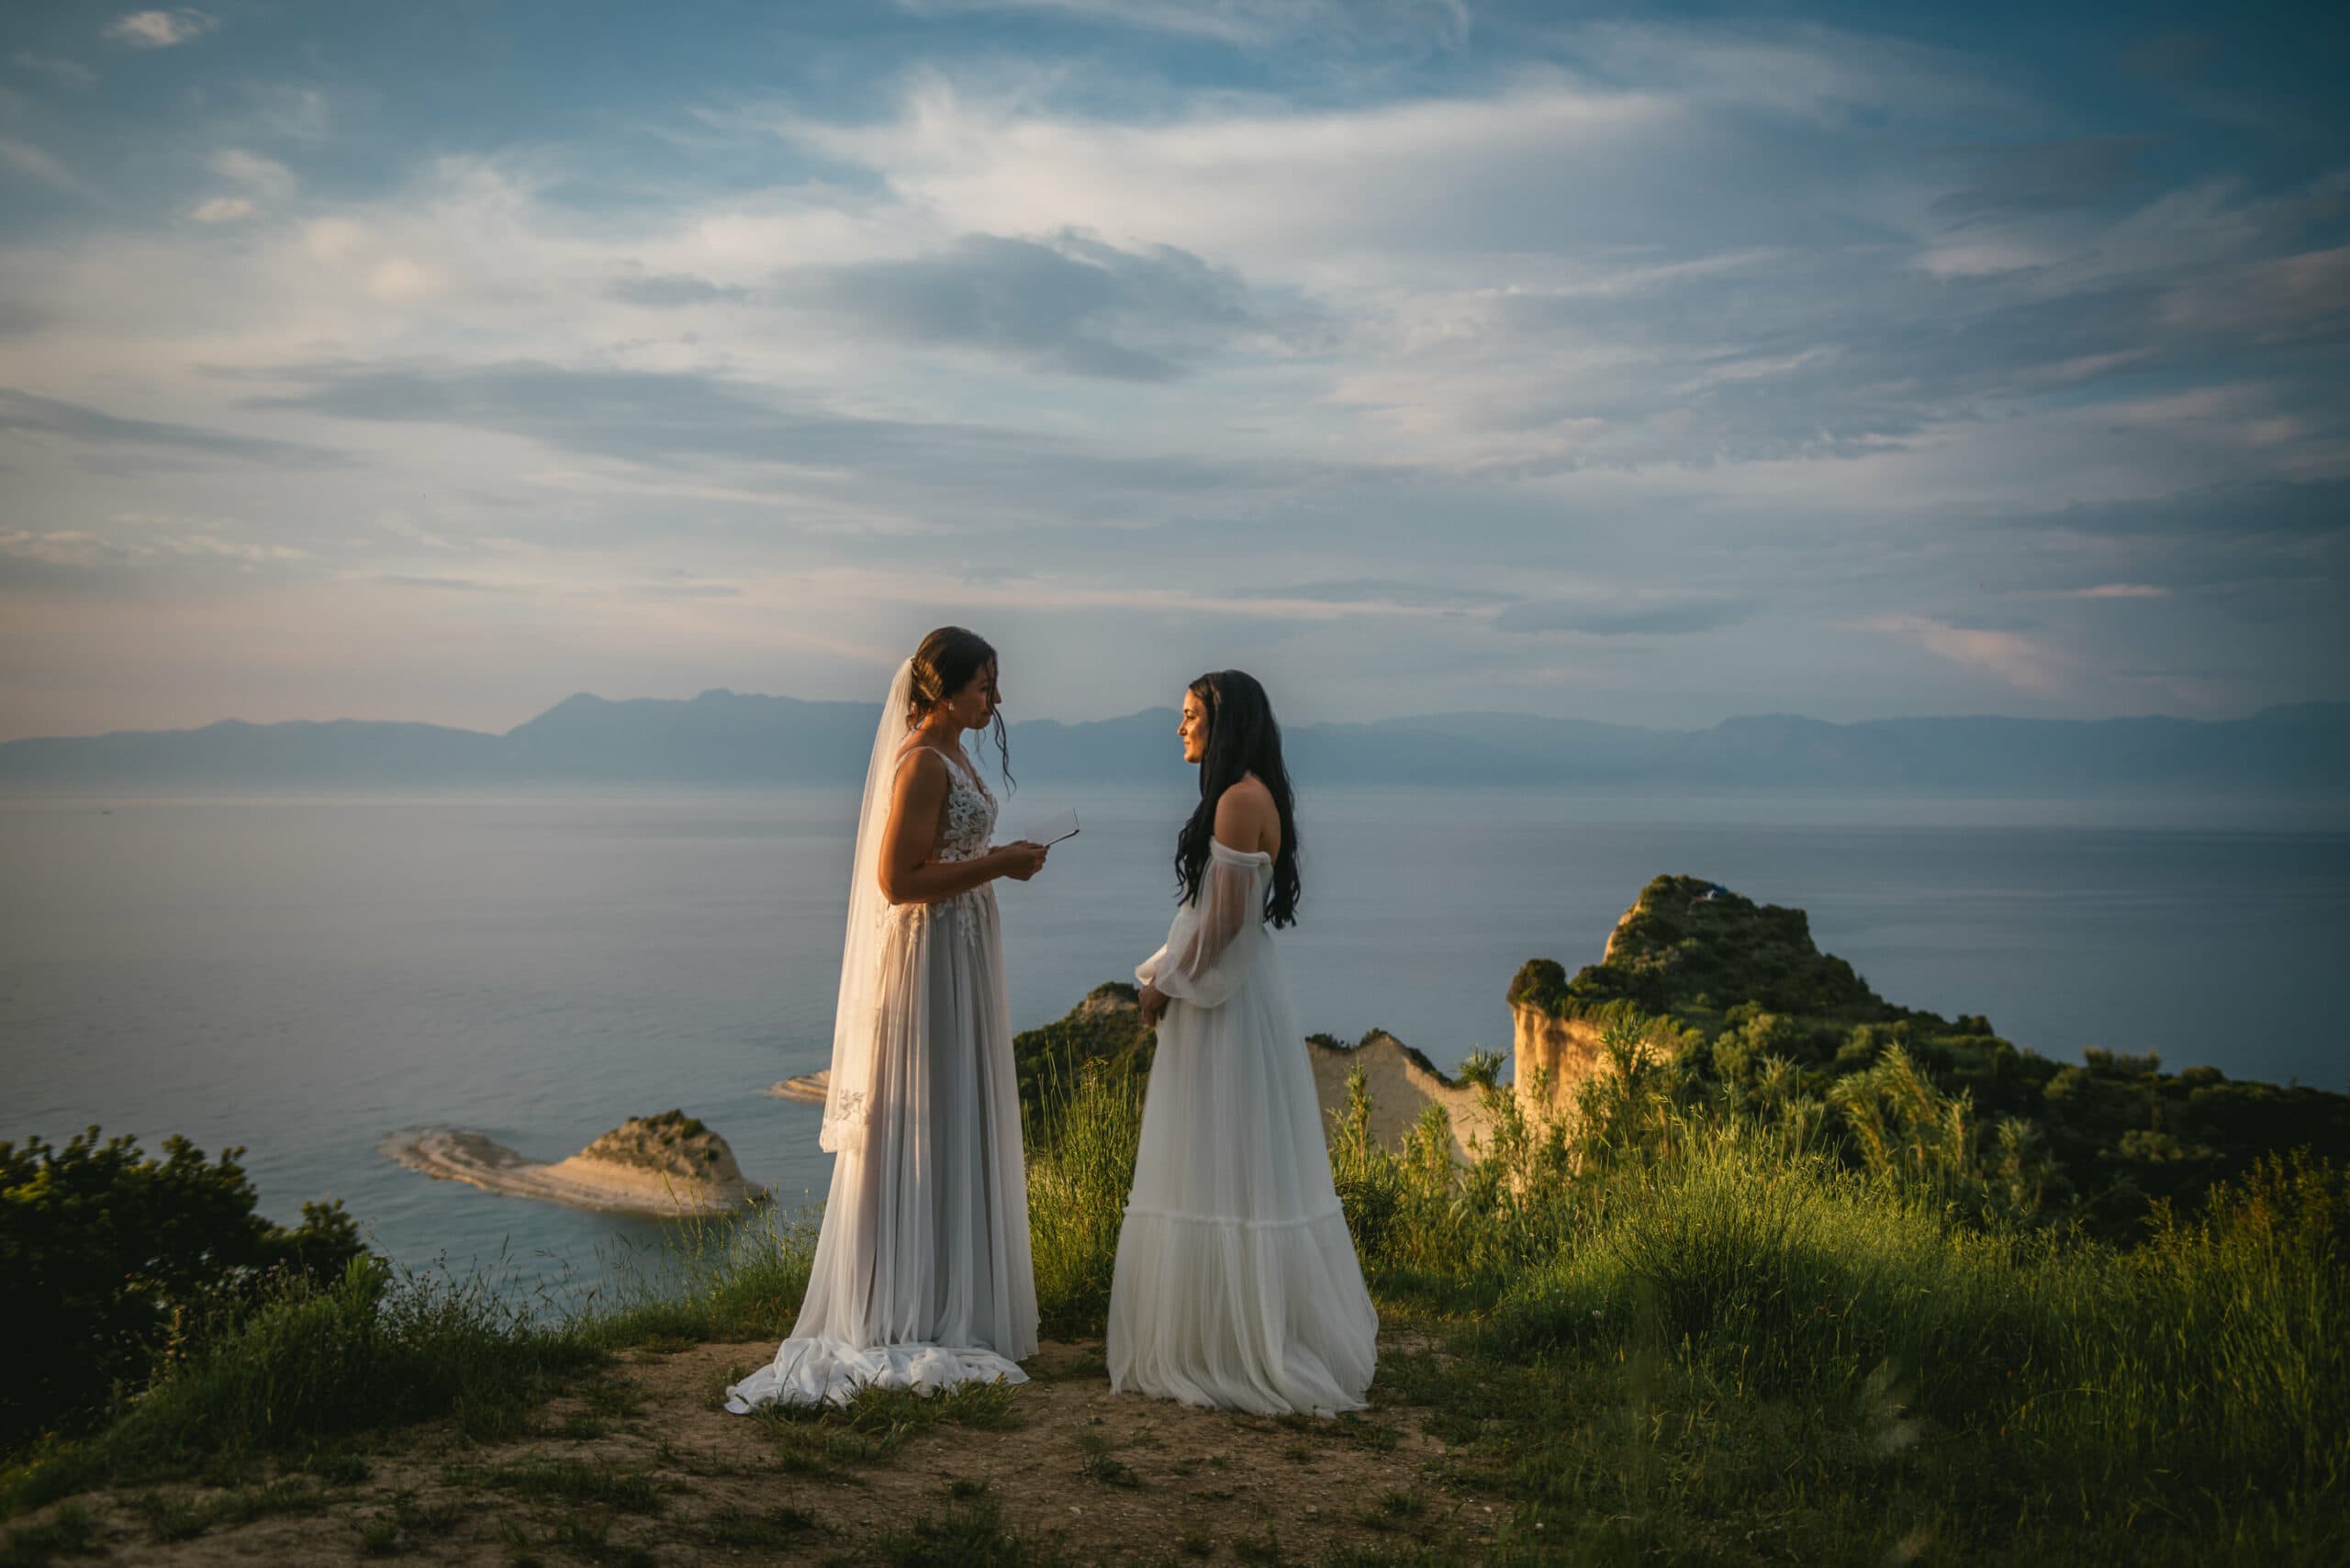 The couple sharing smiles during their heartfelt Corfu elopement ceremony.